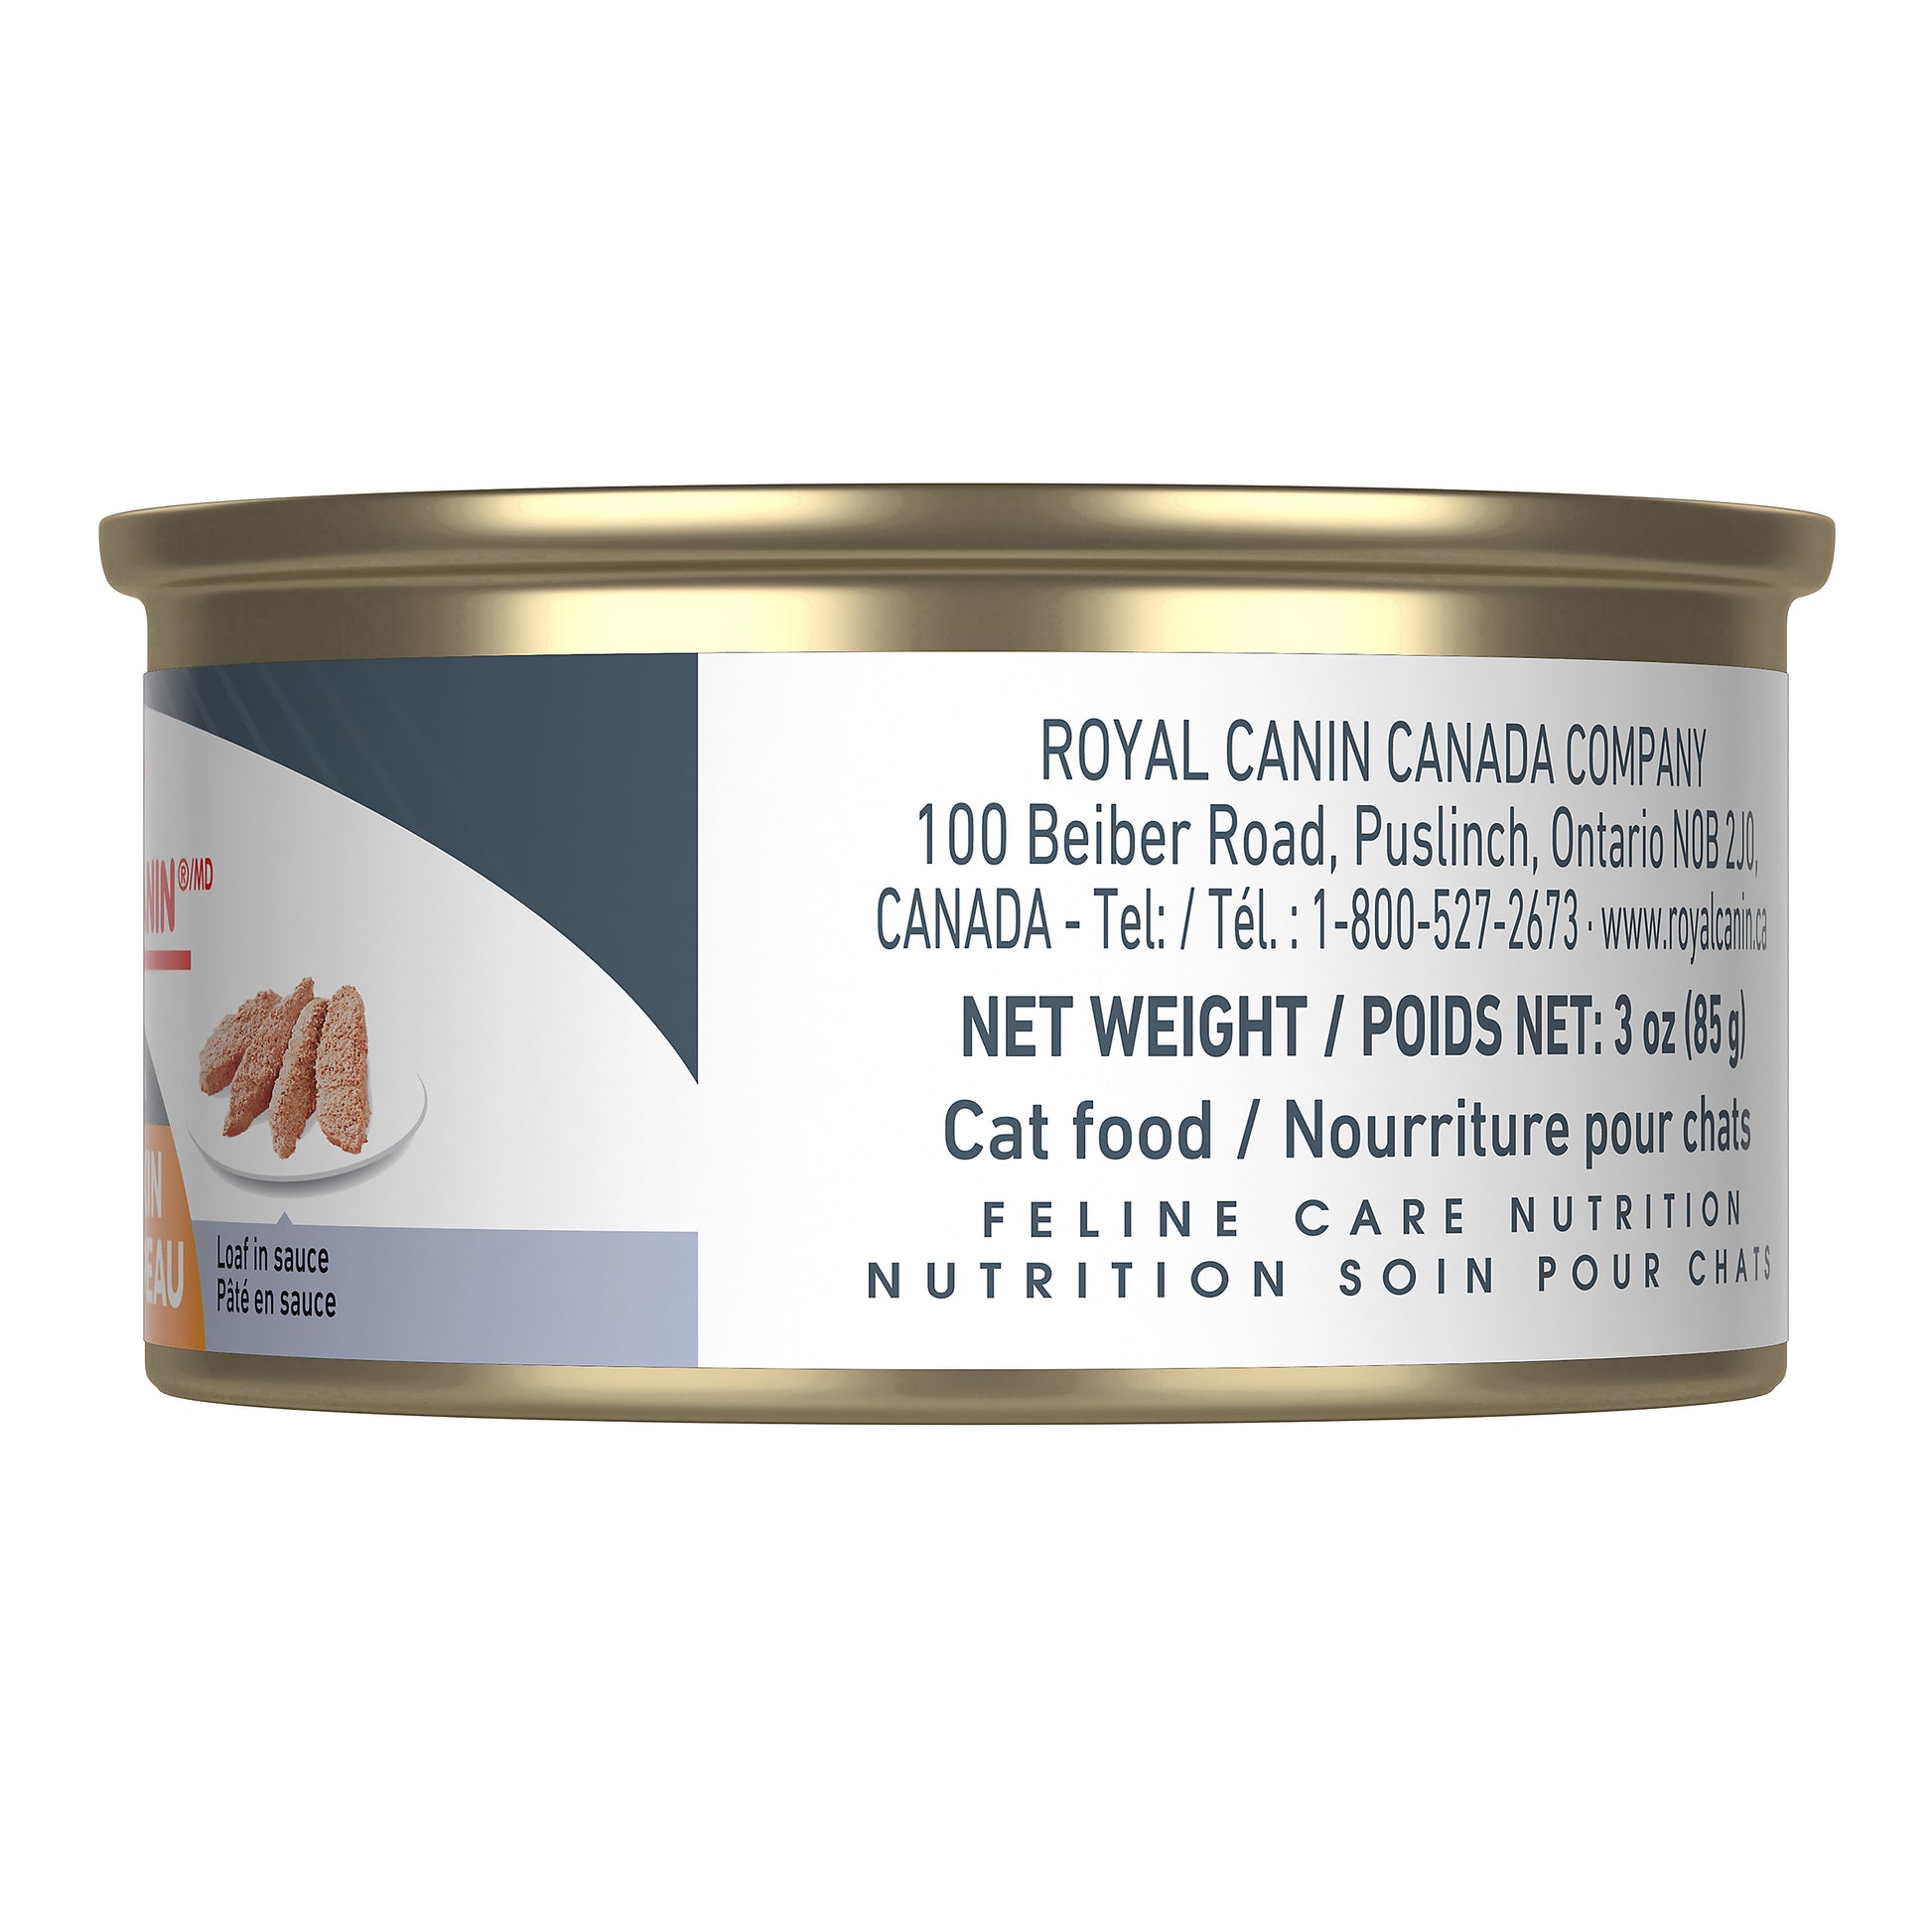 Royal Canin Feline Care Nutrition Hair & Skin Care Loaf in Sauce Canned Cat Food  Canned Cat Food  | PetMax Canada